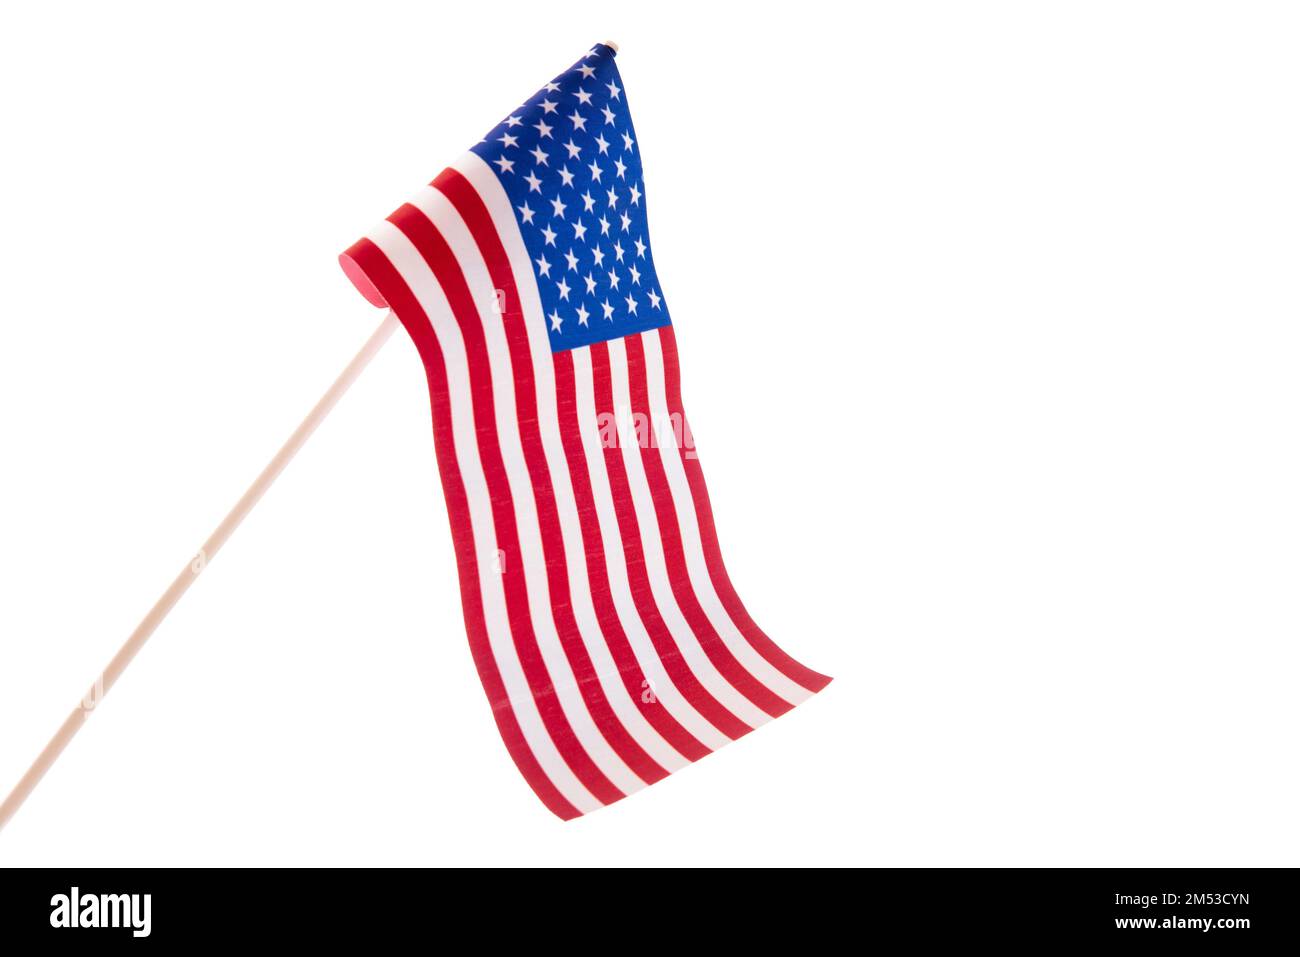 The USA flag is developing in the wind against a white background. Isolate Stock Photo